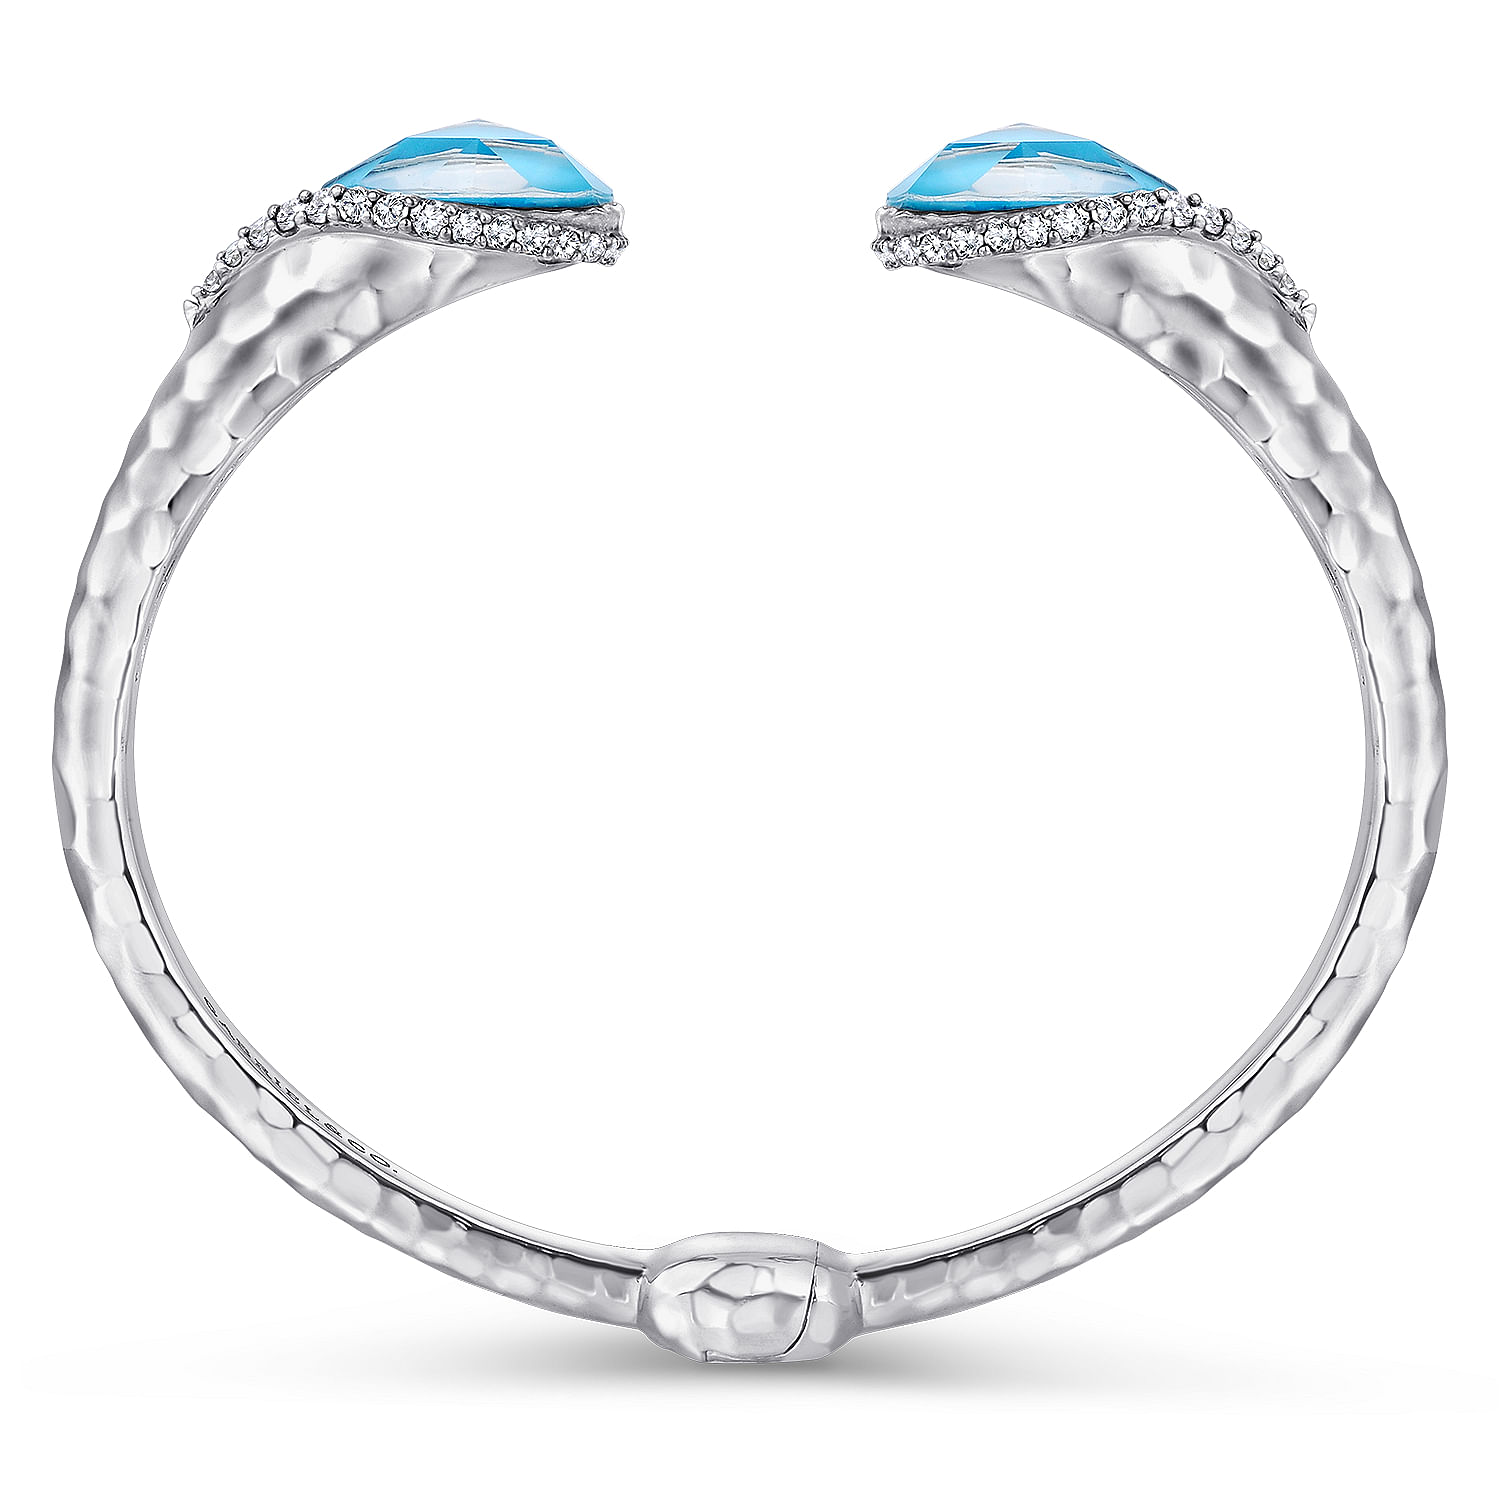 925 Sterling Silver Teardrop Rock Crystal/Turquoise and White Sapphire Split Bangle